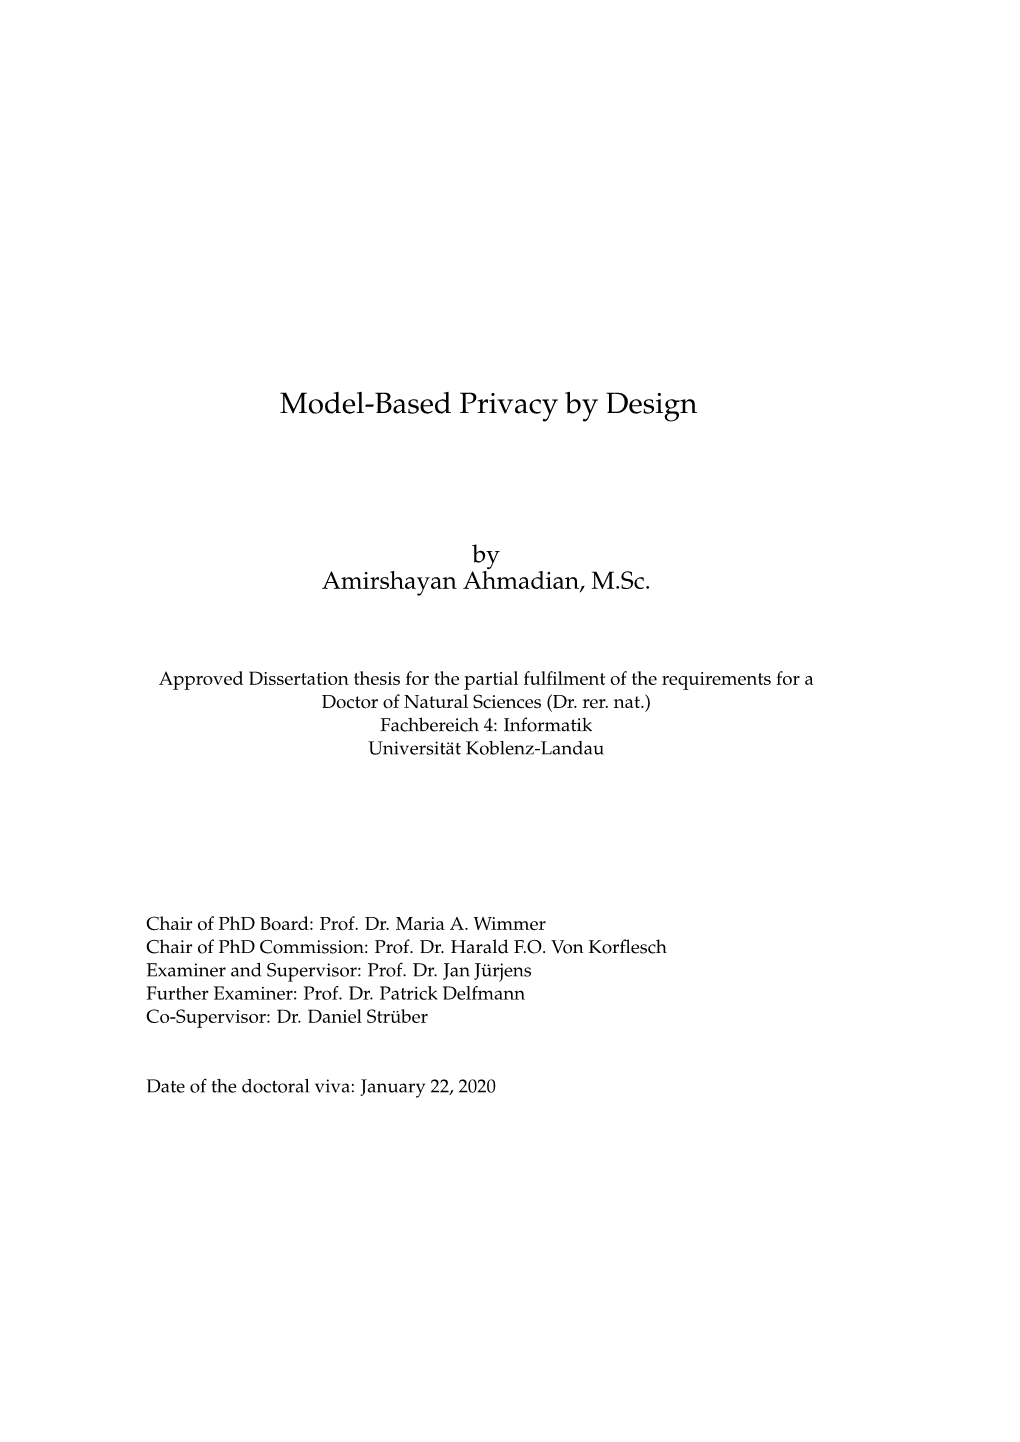 Model-Based Privacy by Design